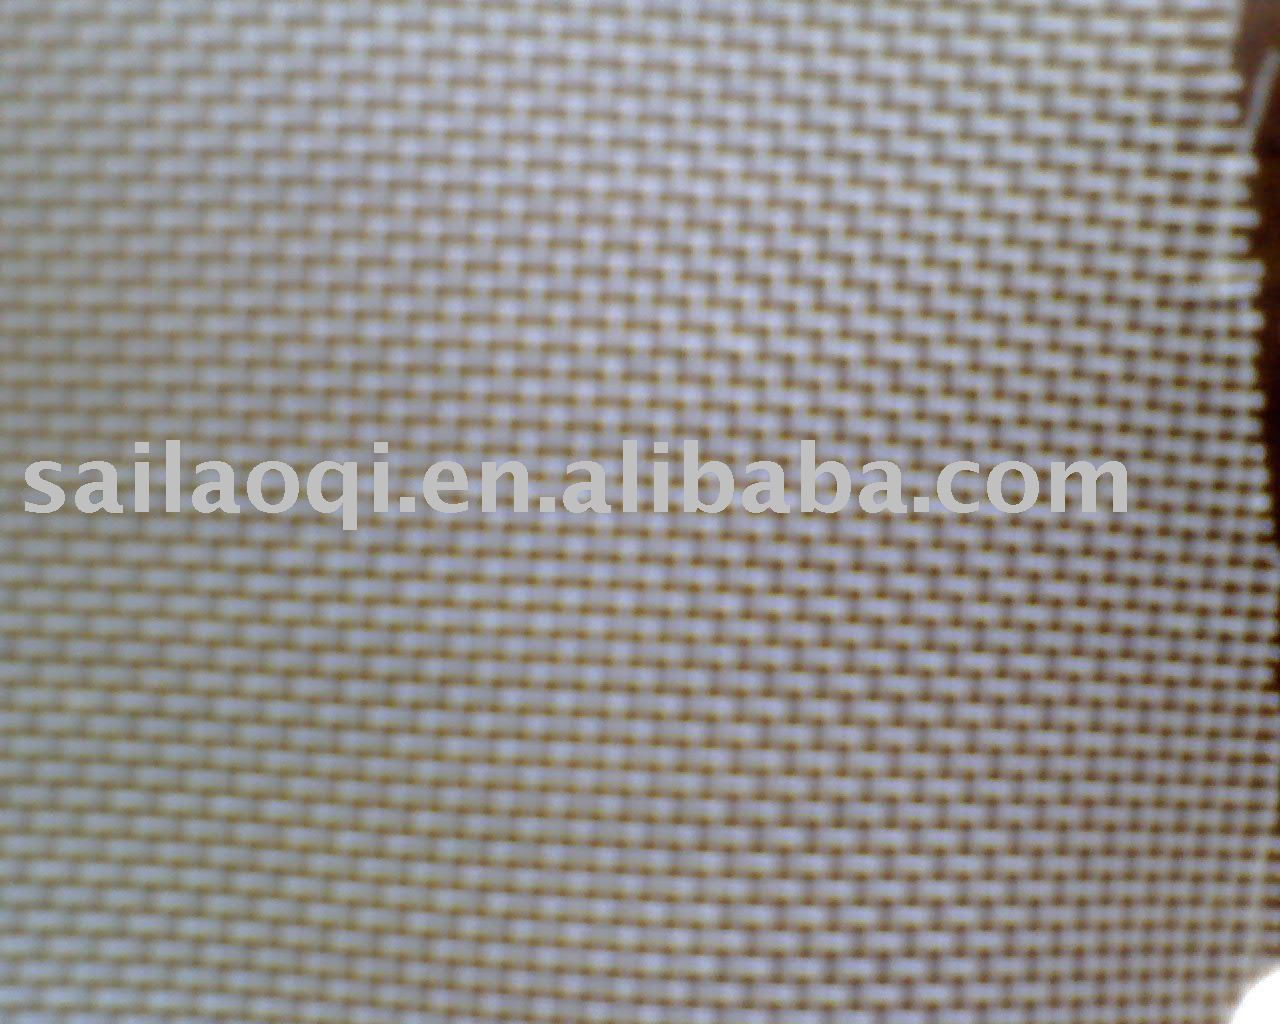 Products Nylon Screen Buyers 89